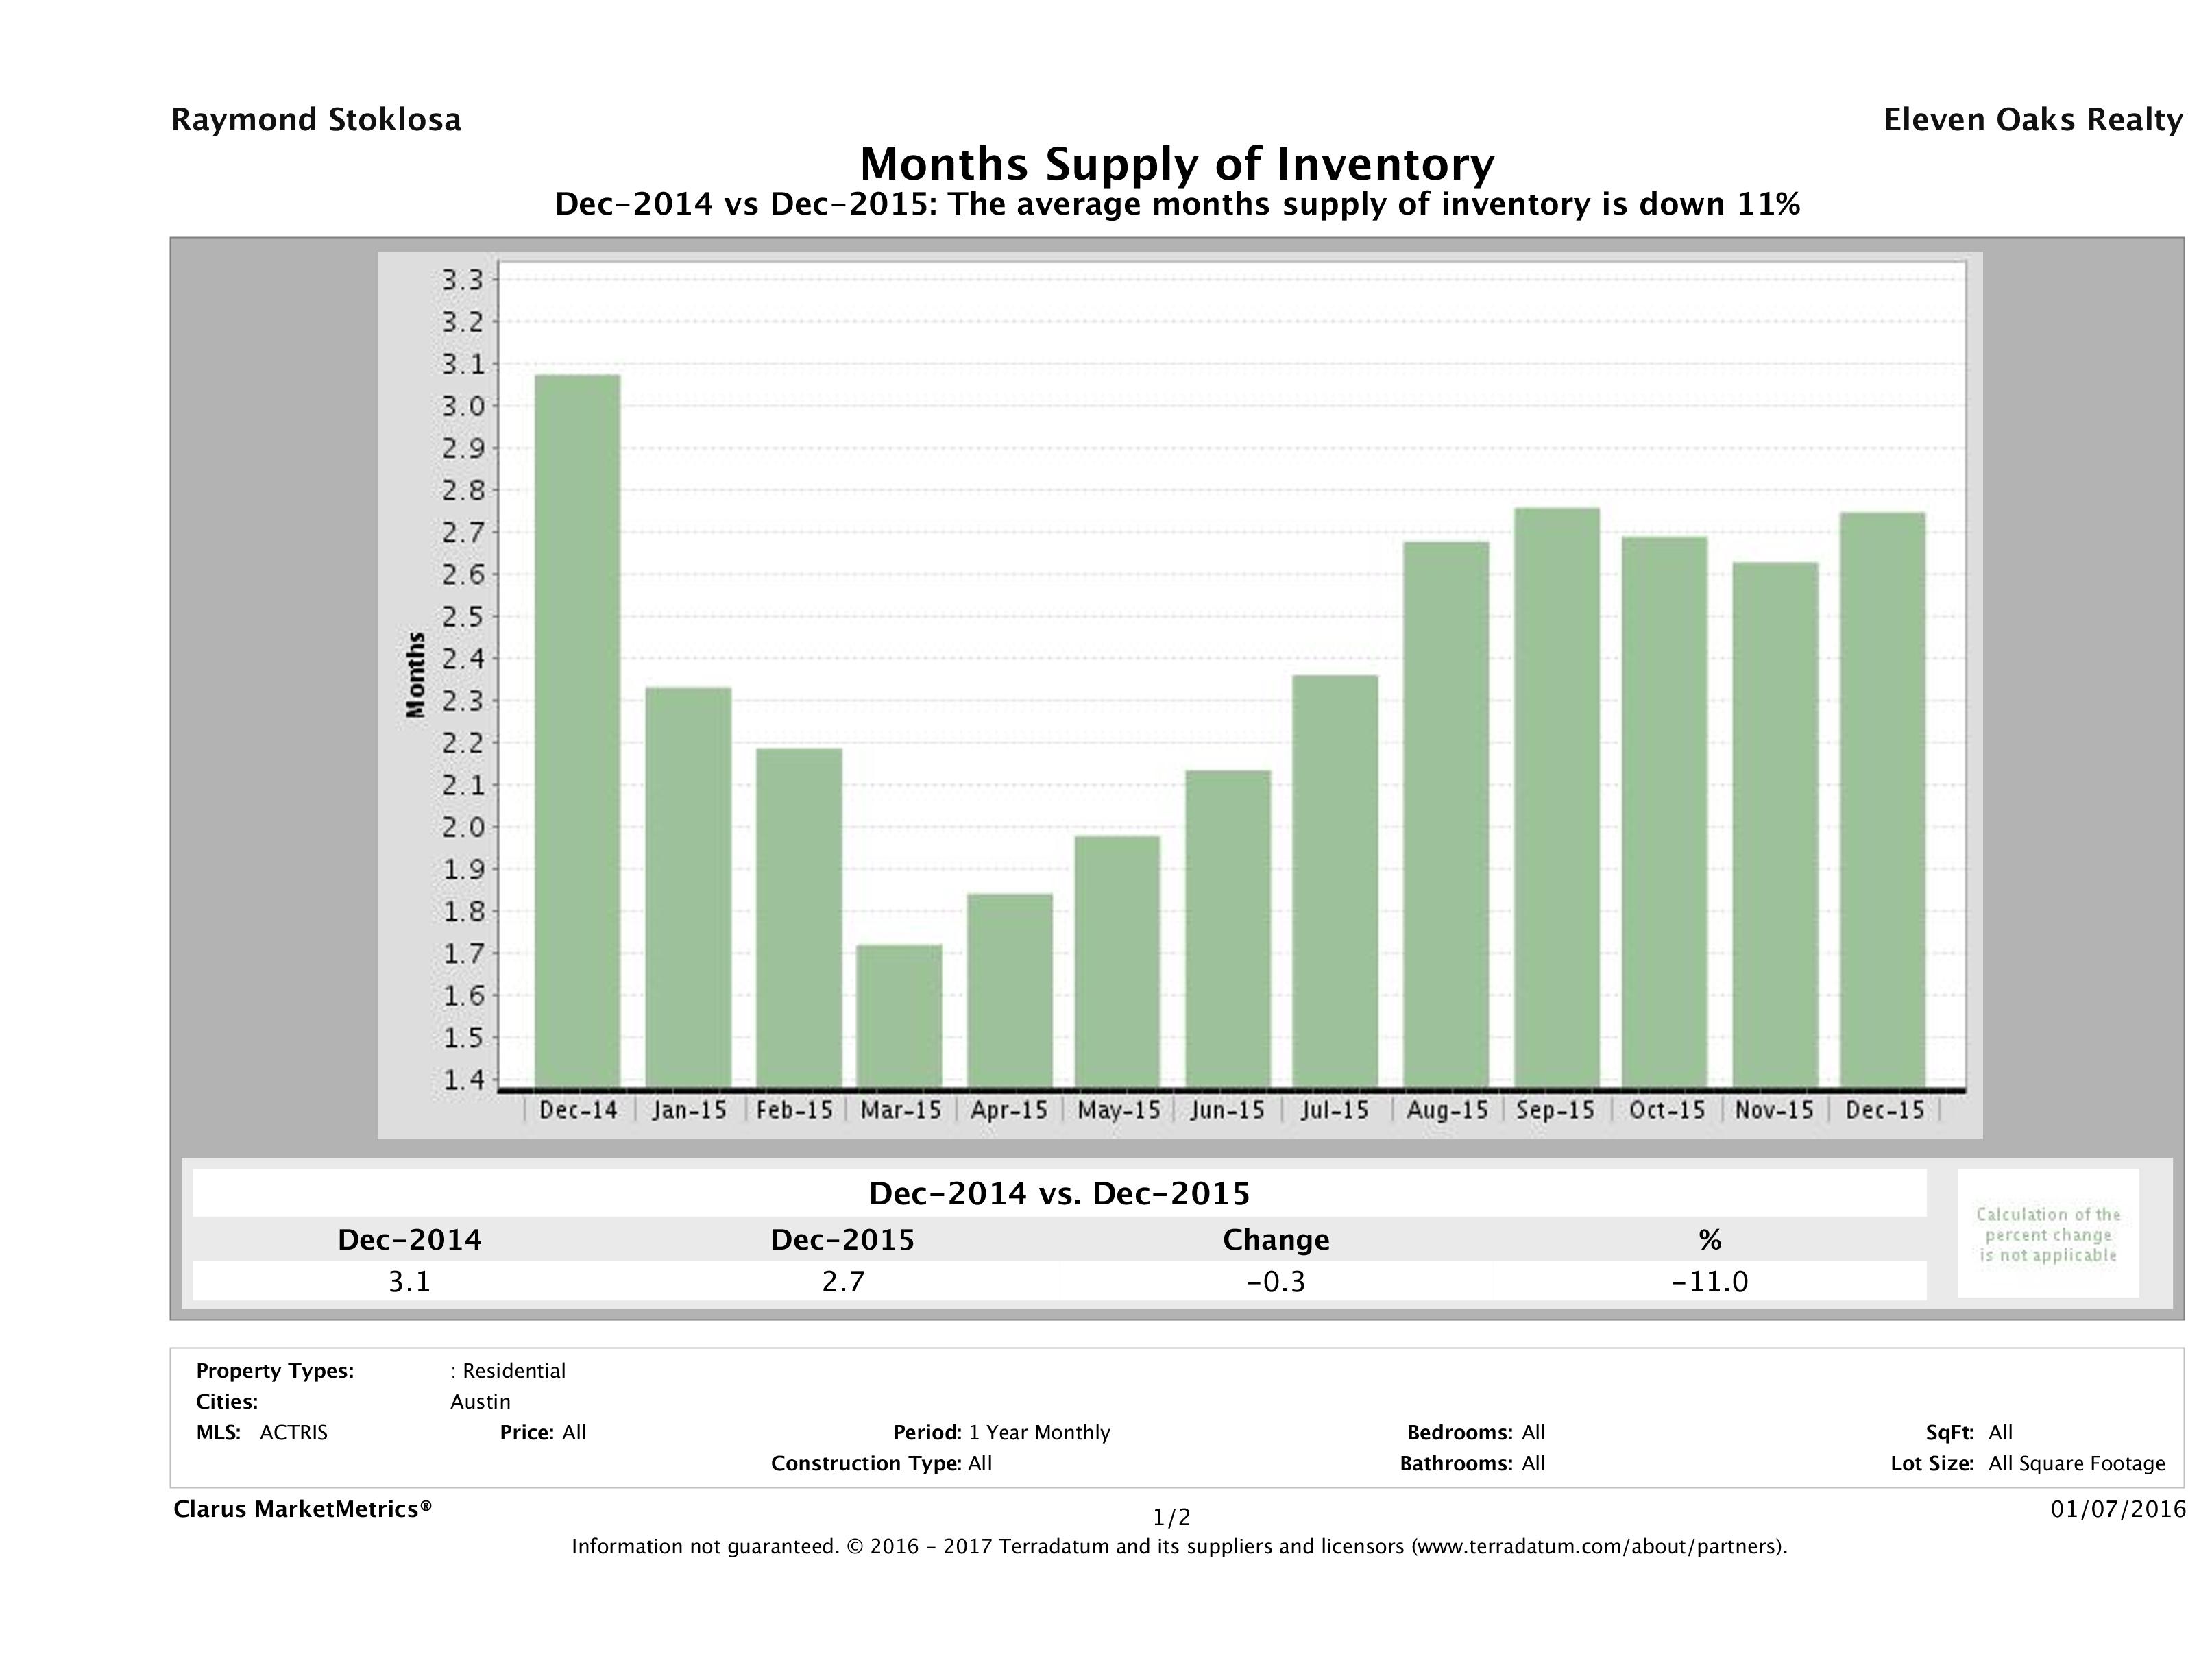 Austin single family home months inventory December 2015